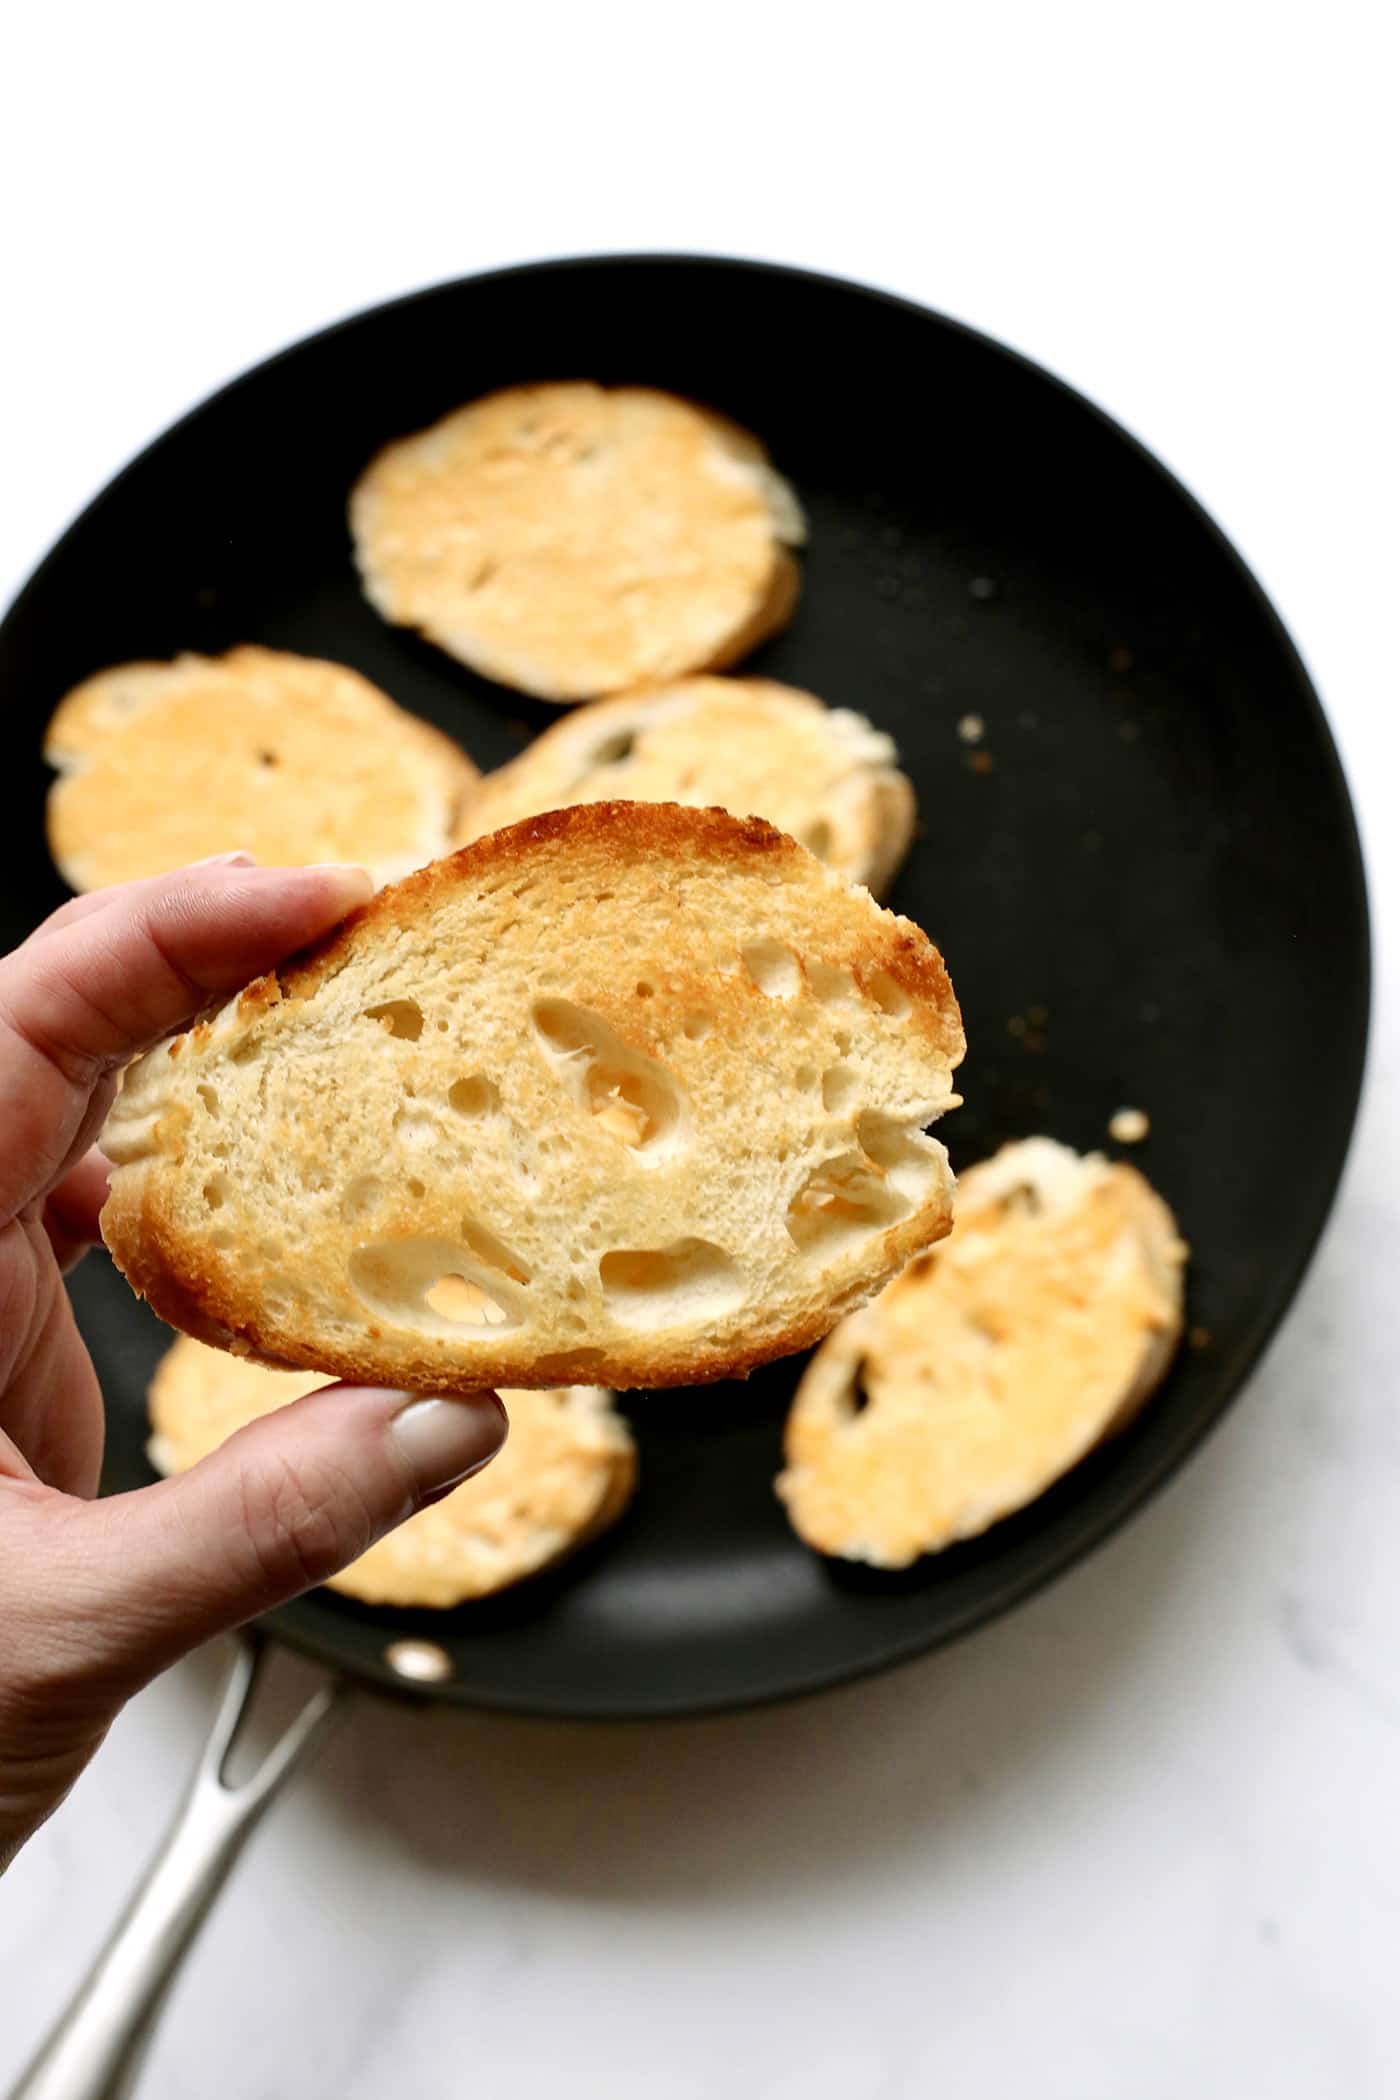 A hand holding a piece of toasted bread over a skillet.